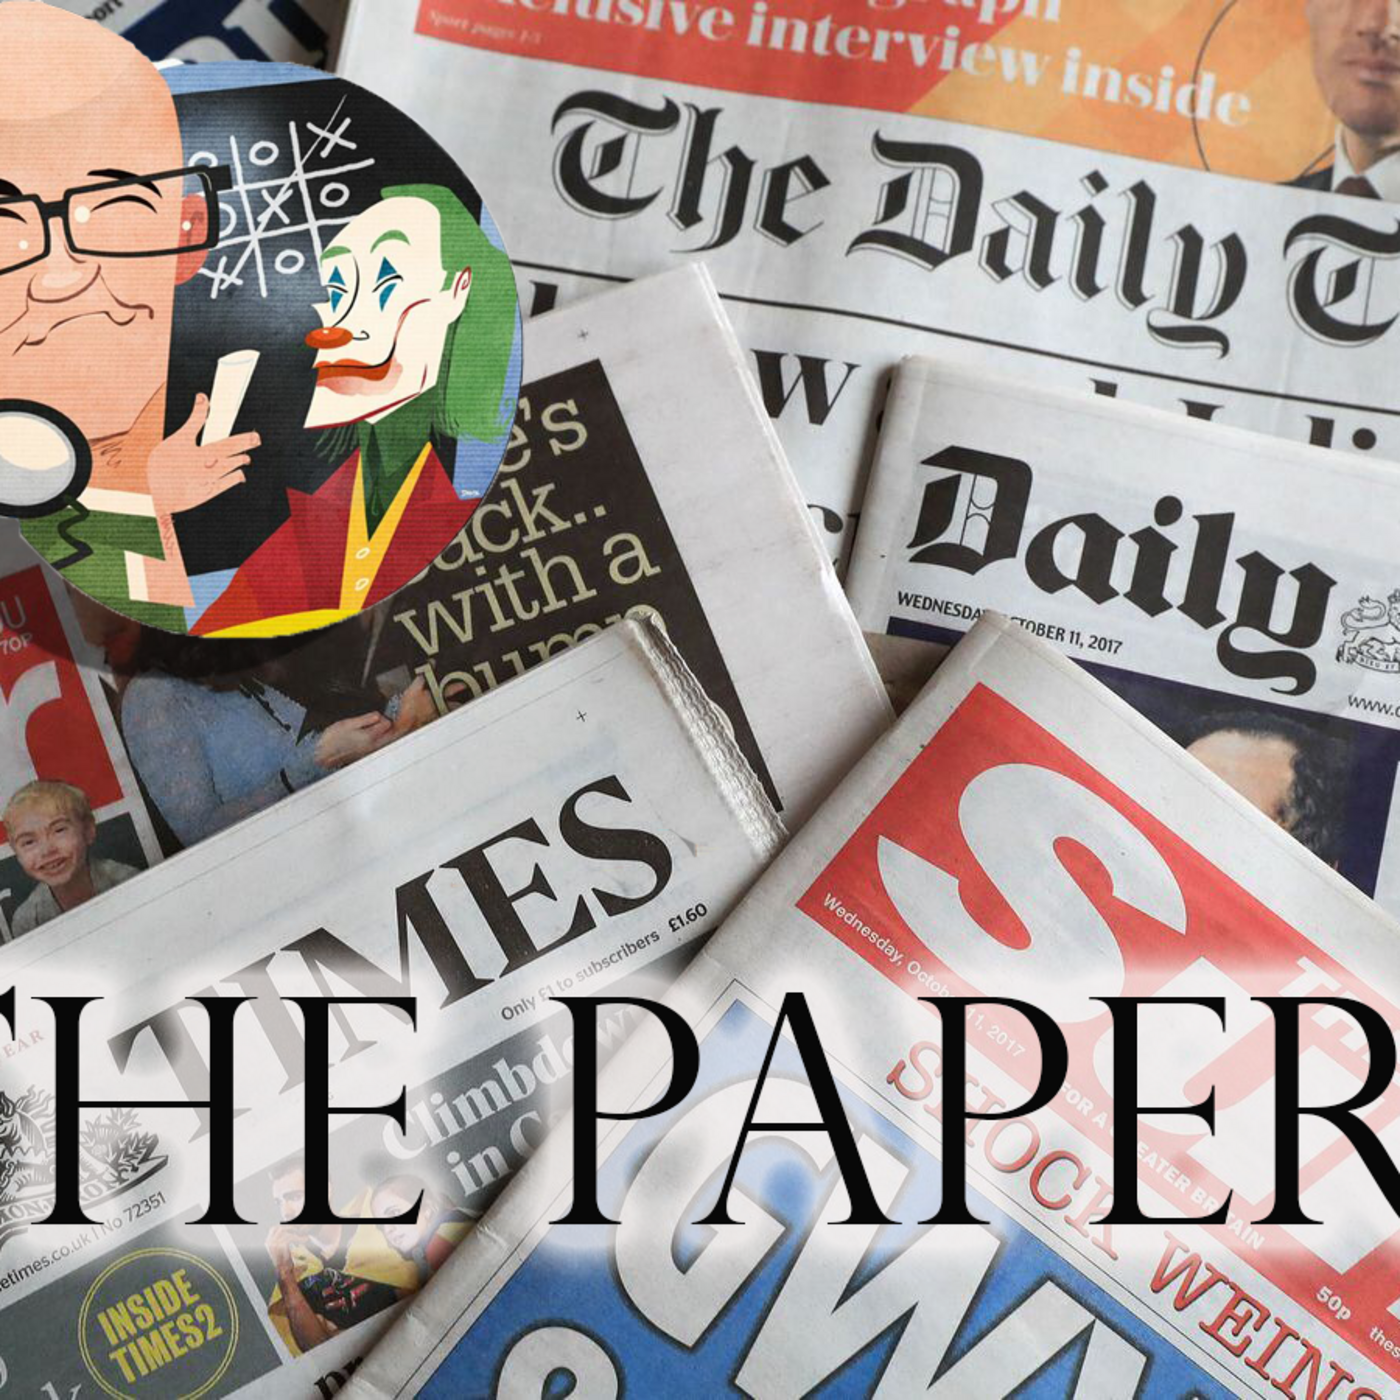 Episode 1679: The Papers - Tuesday November 21st 2023